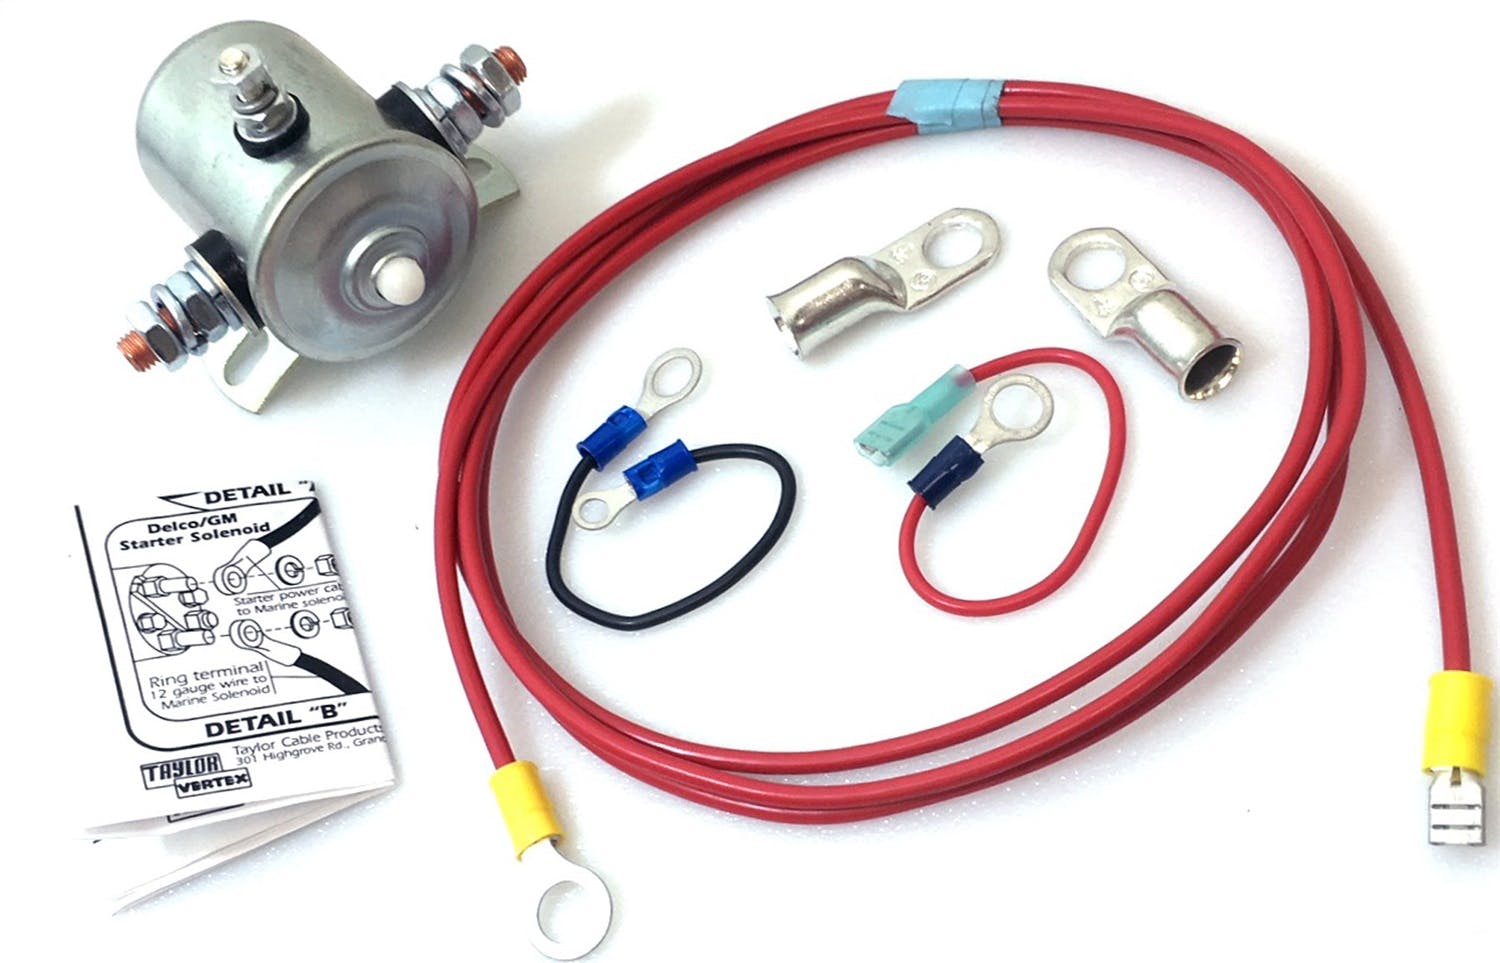 Taylor Cable Products 383480 Hot Start/Bump Start Solenoid Kit